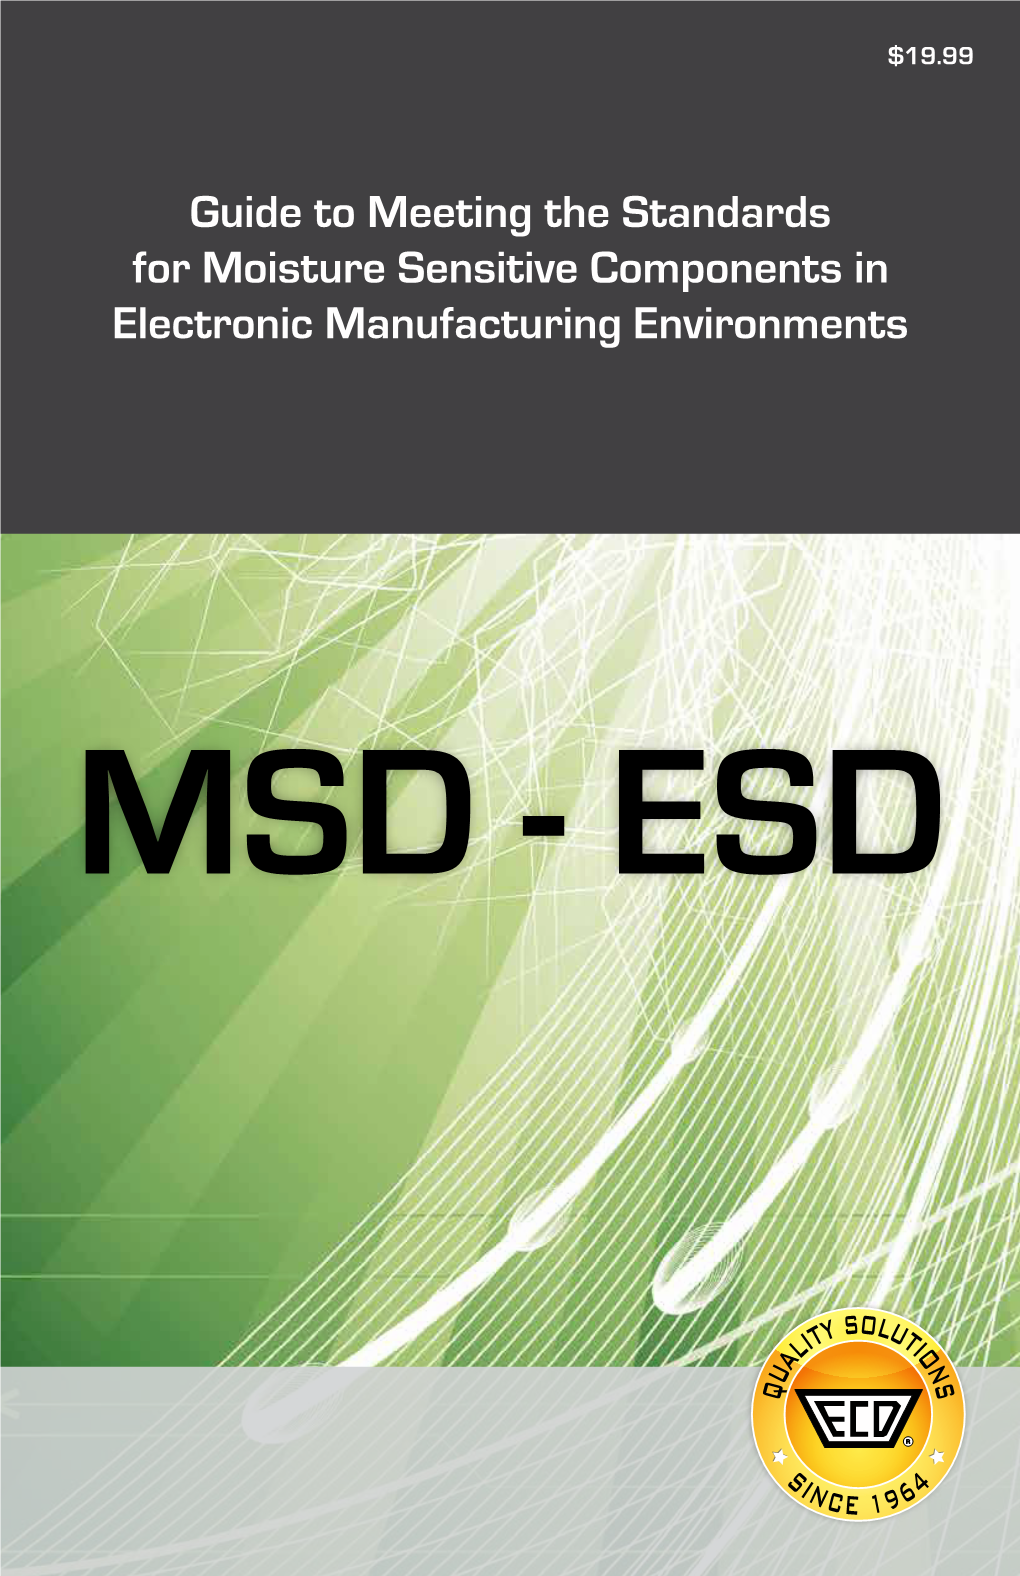 Guide to Meeting the Standards for Moisture Sensitive Components in Electronic Manufacturing Environments